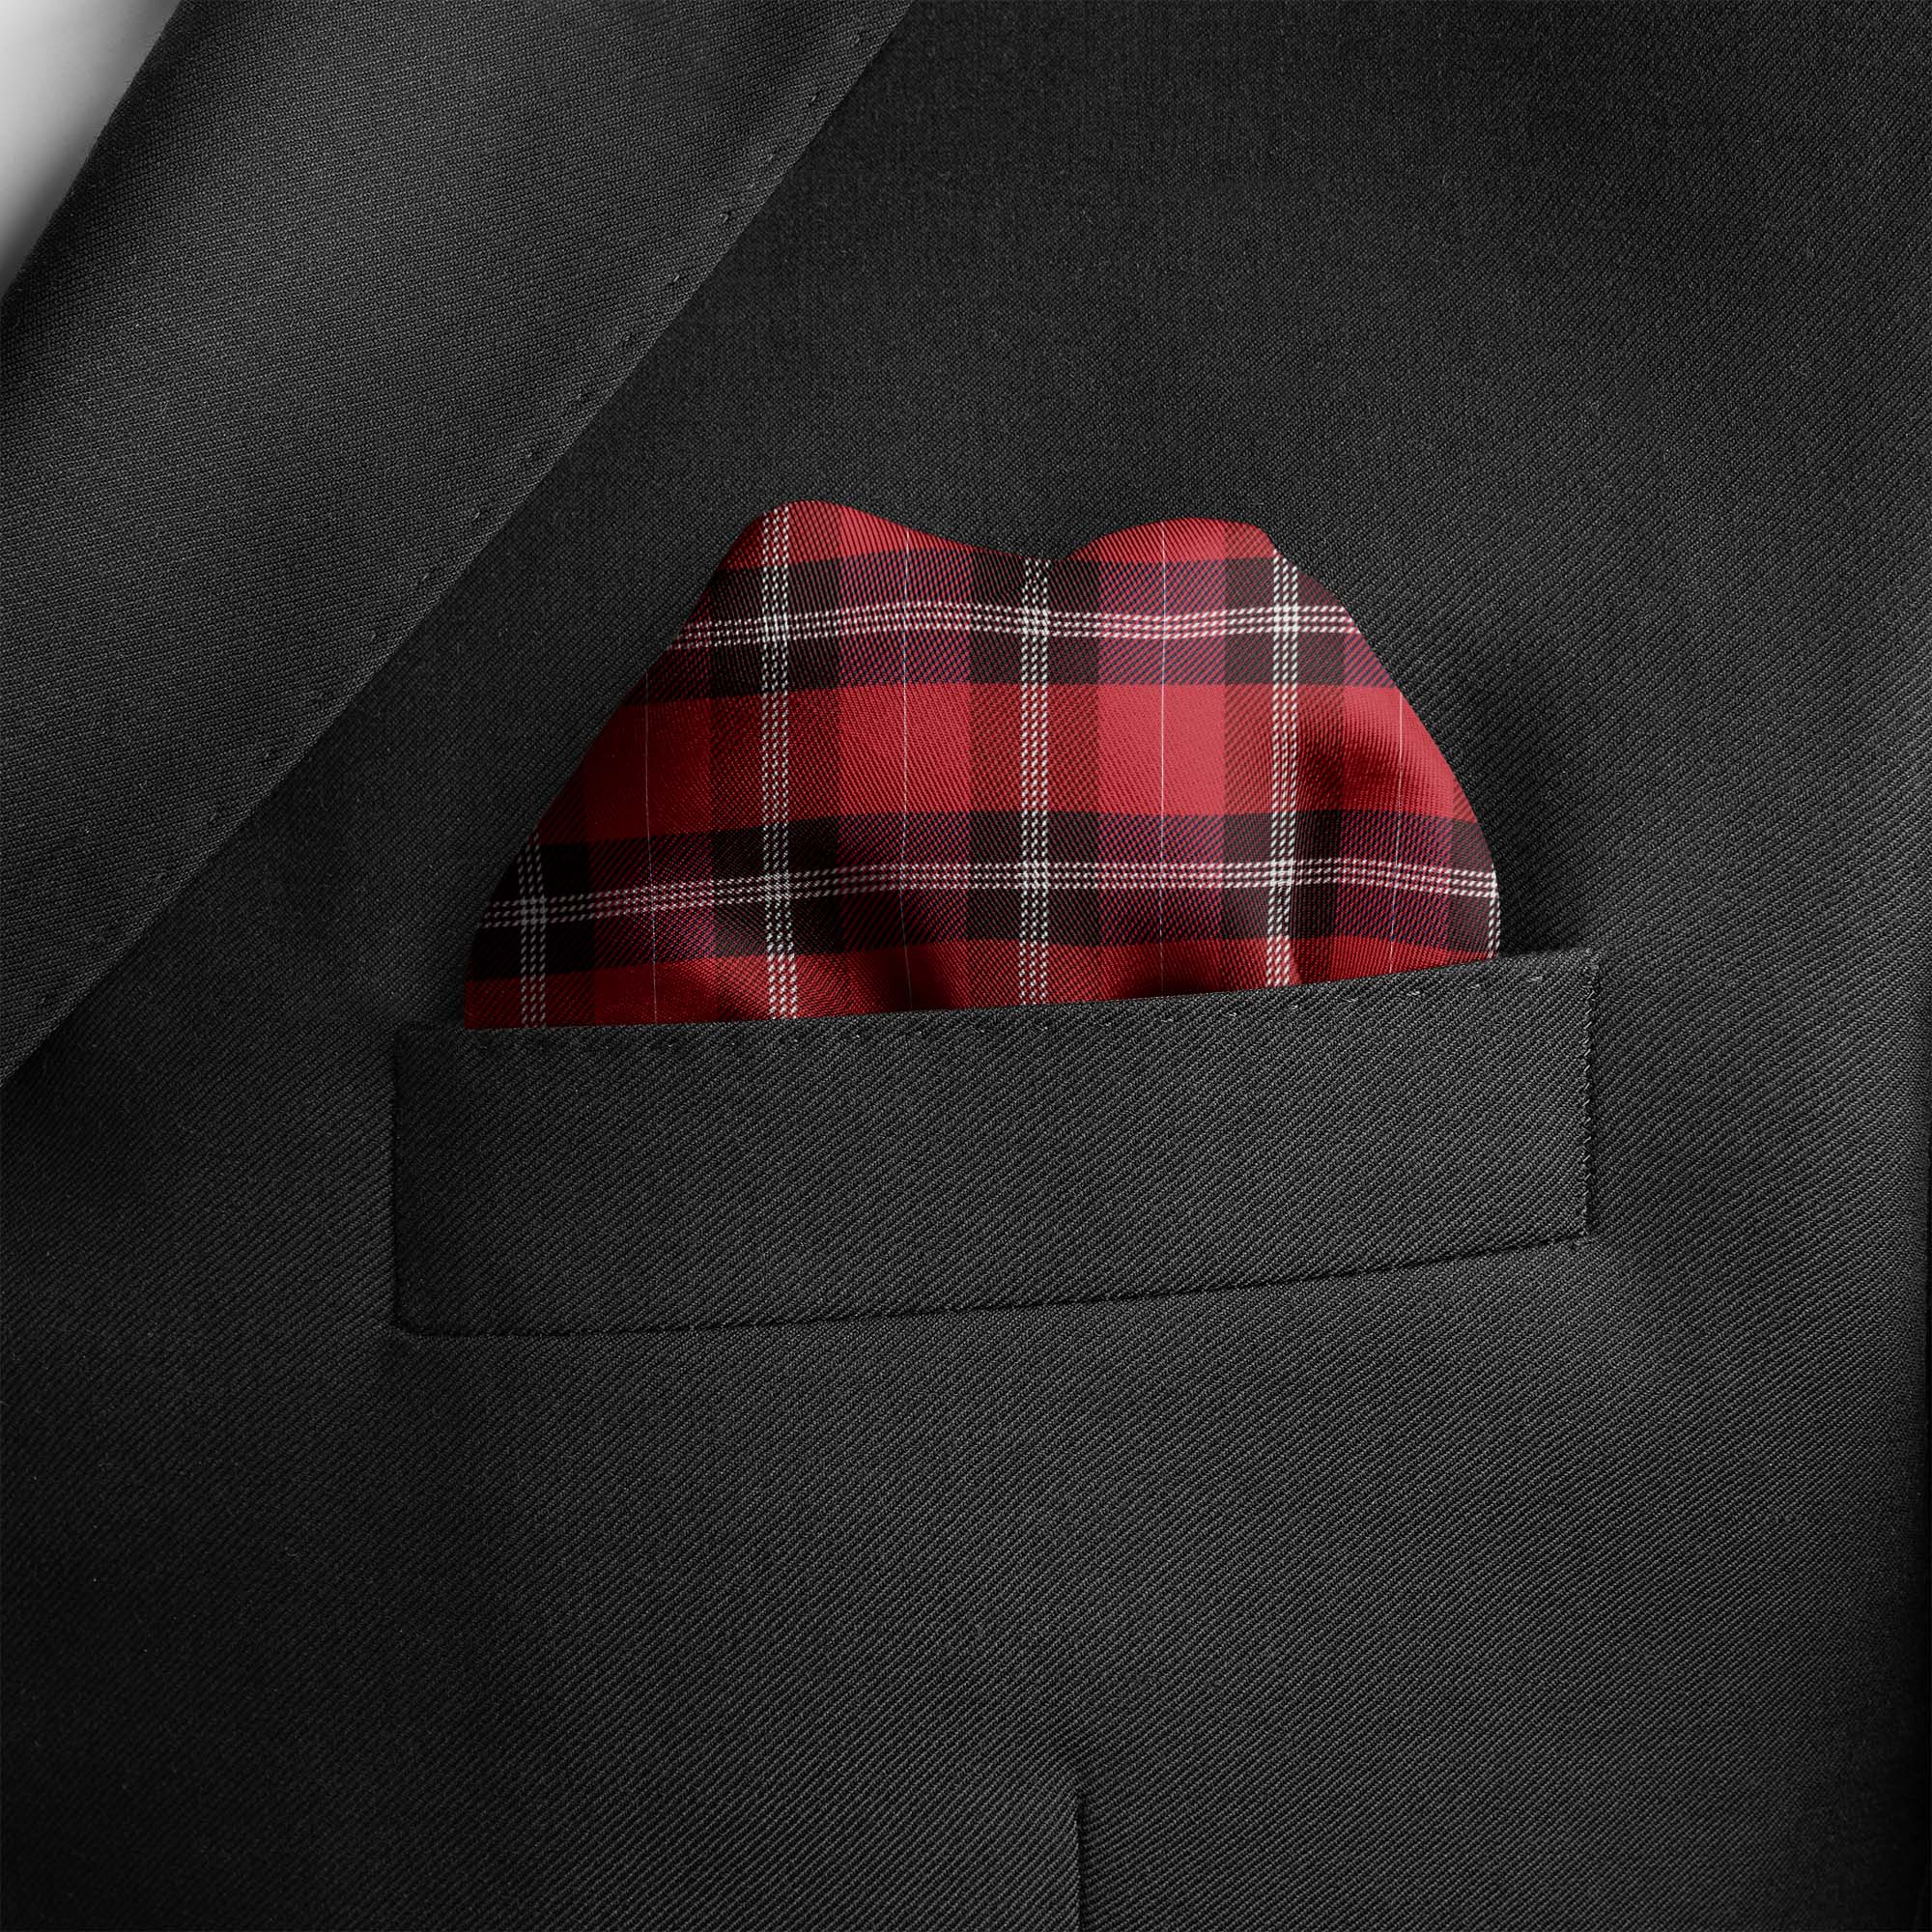 THE RED CLASSIC PLAID SILK POCKET SQUARE